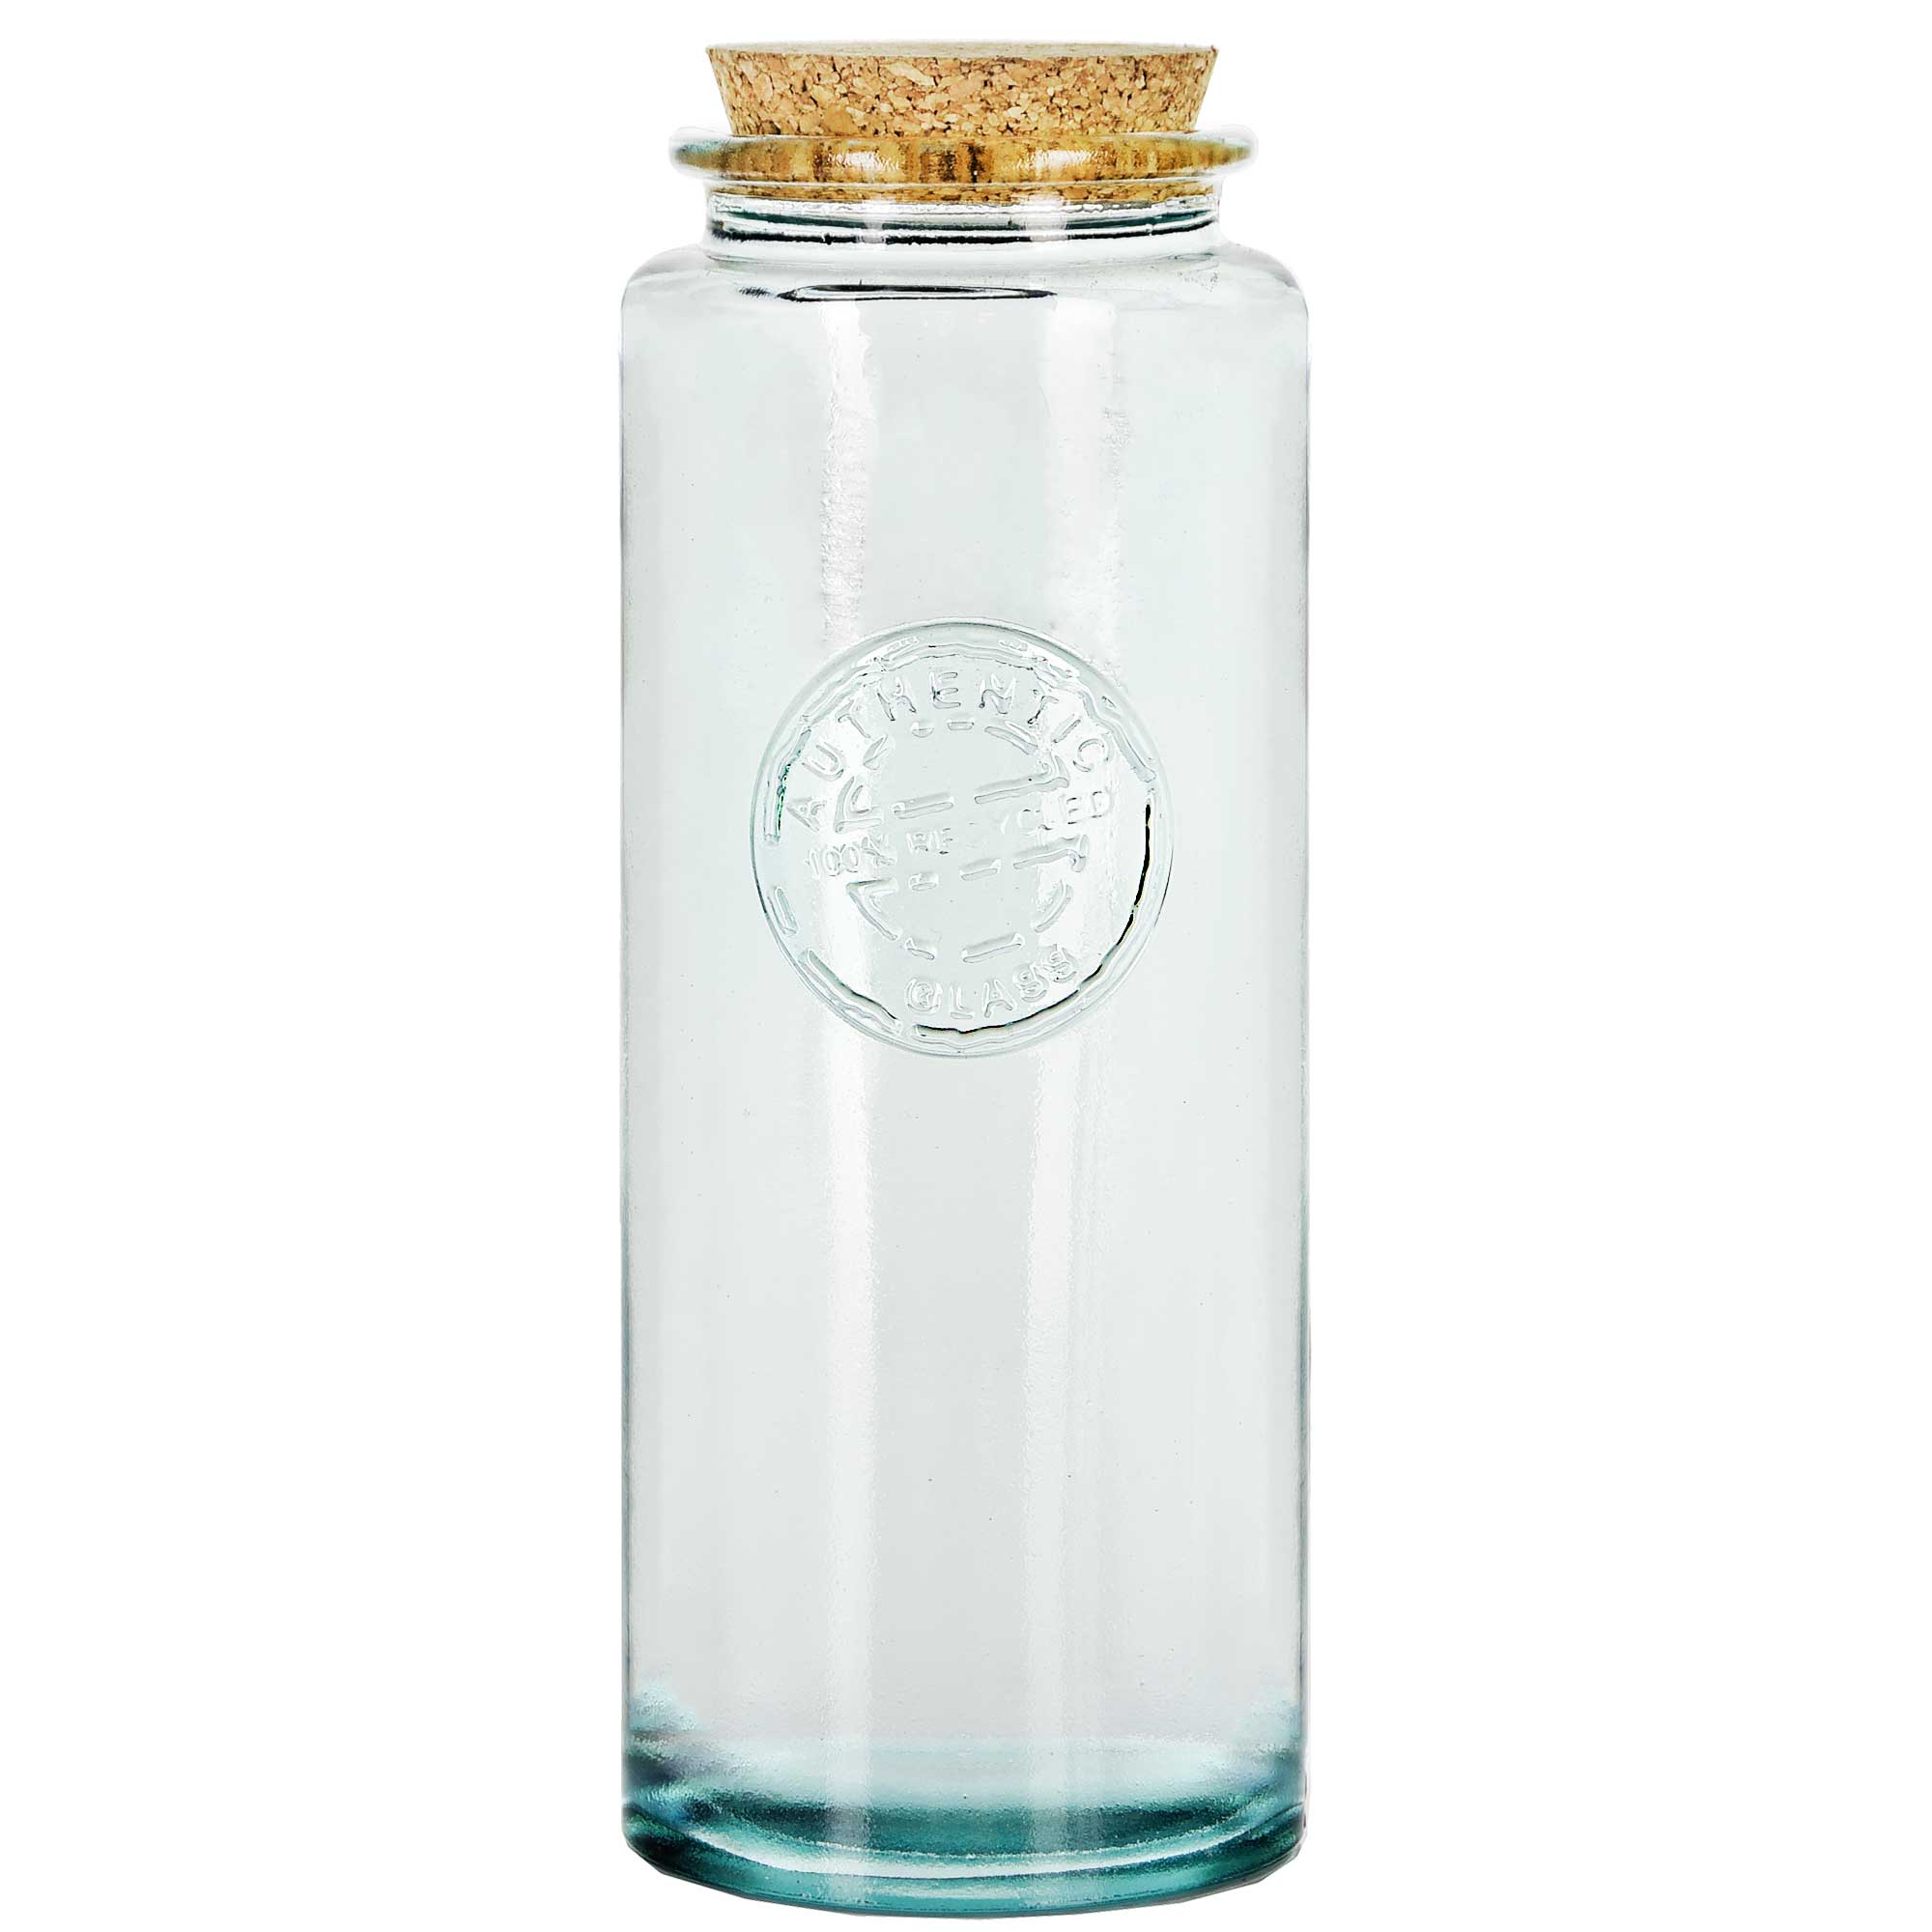 Authentic Jar Recycled Glass 1.45 Liter with Cork